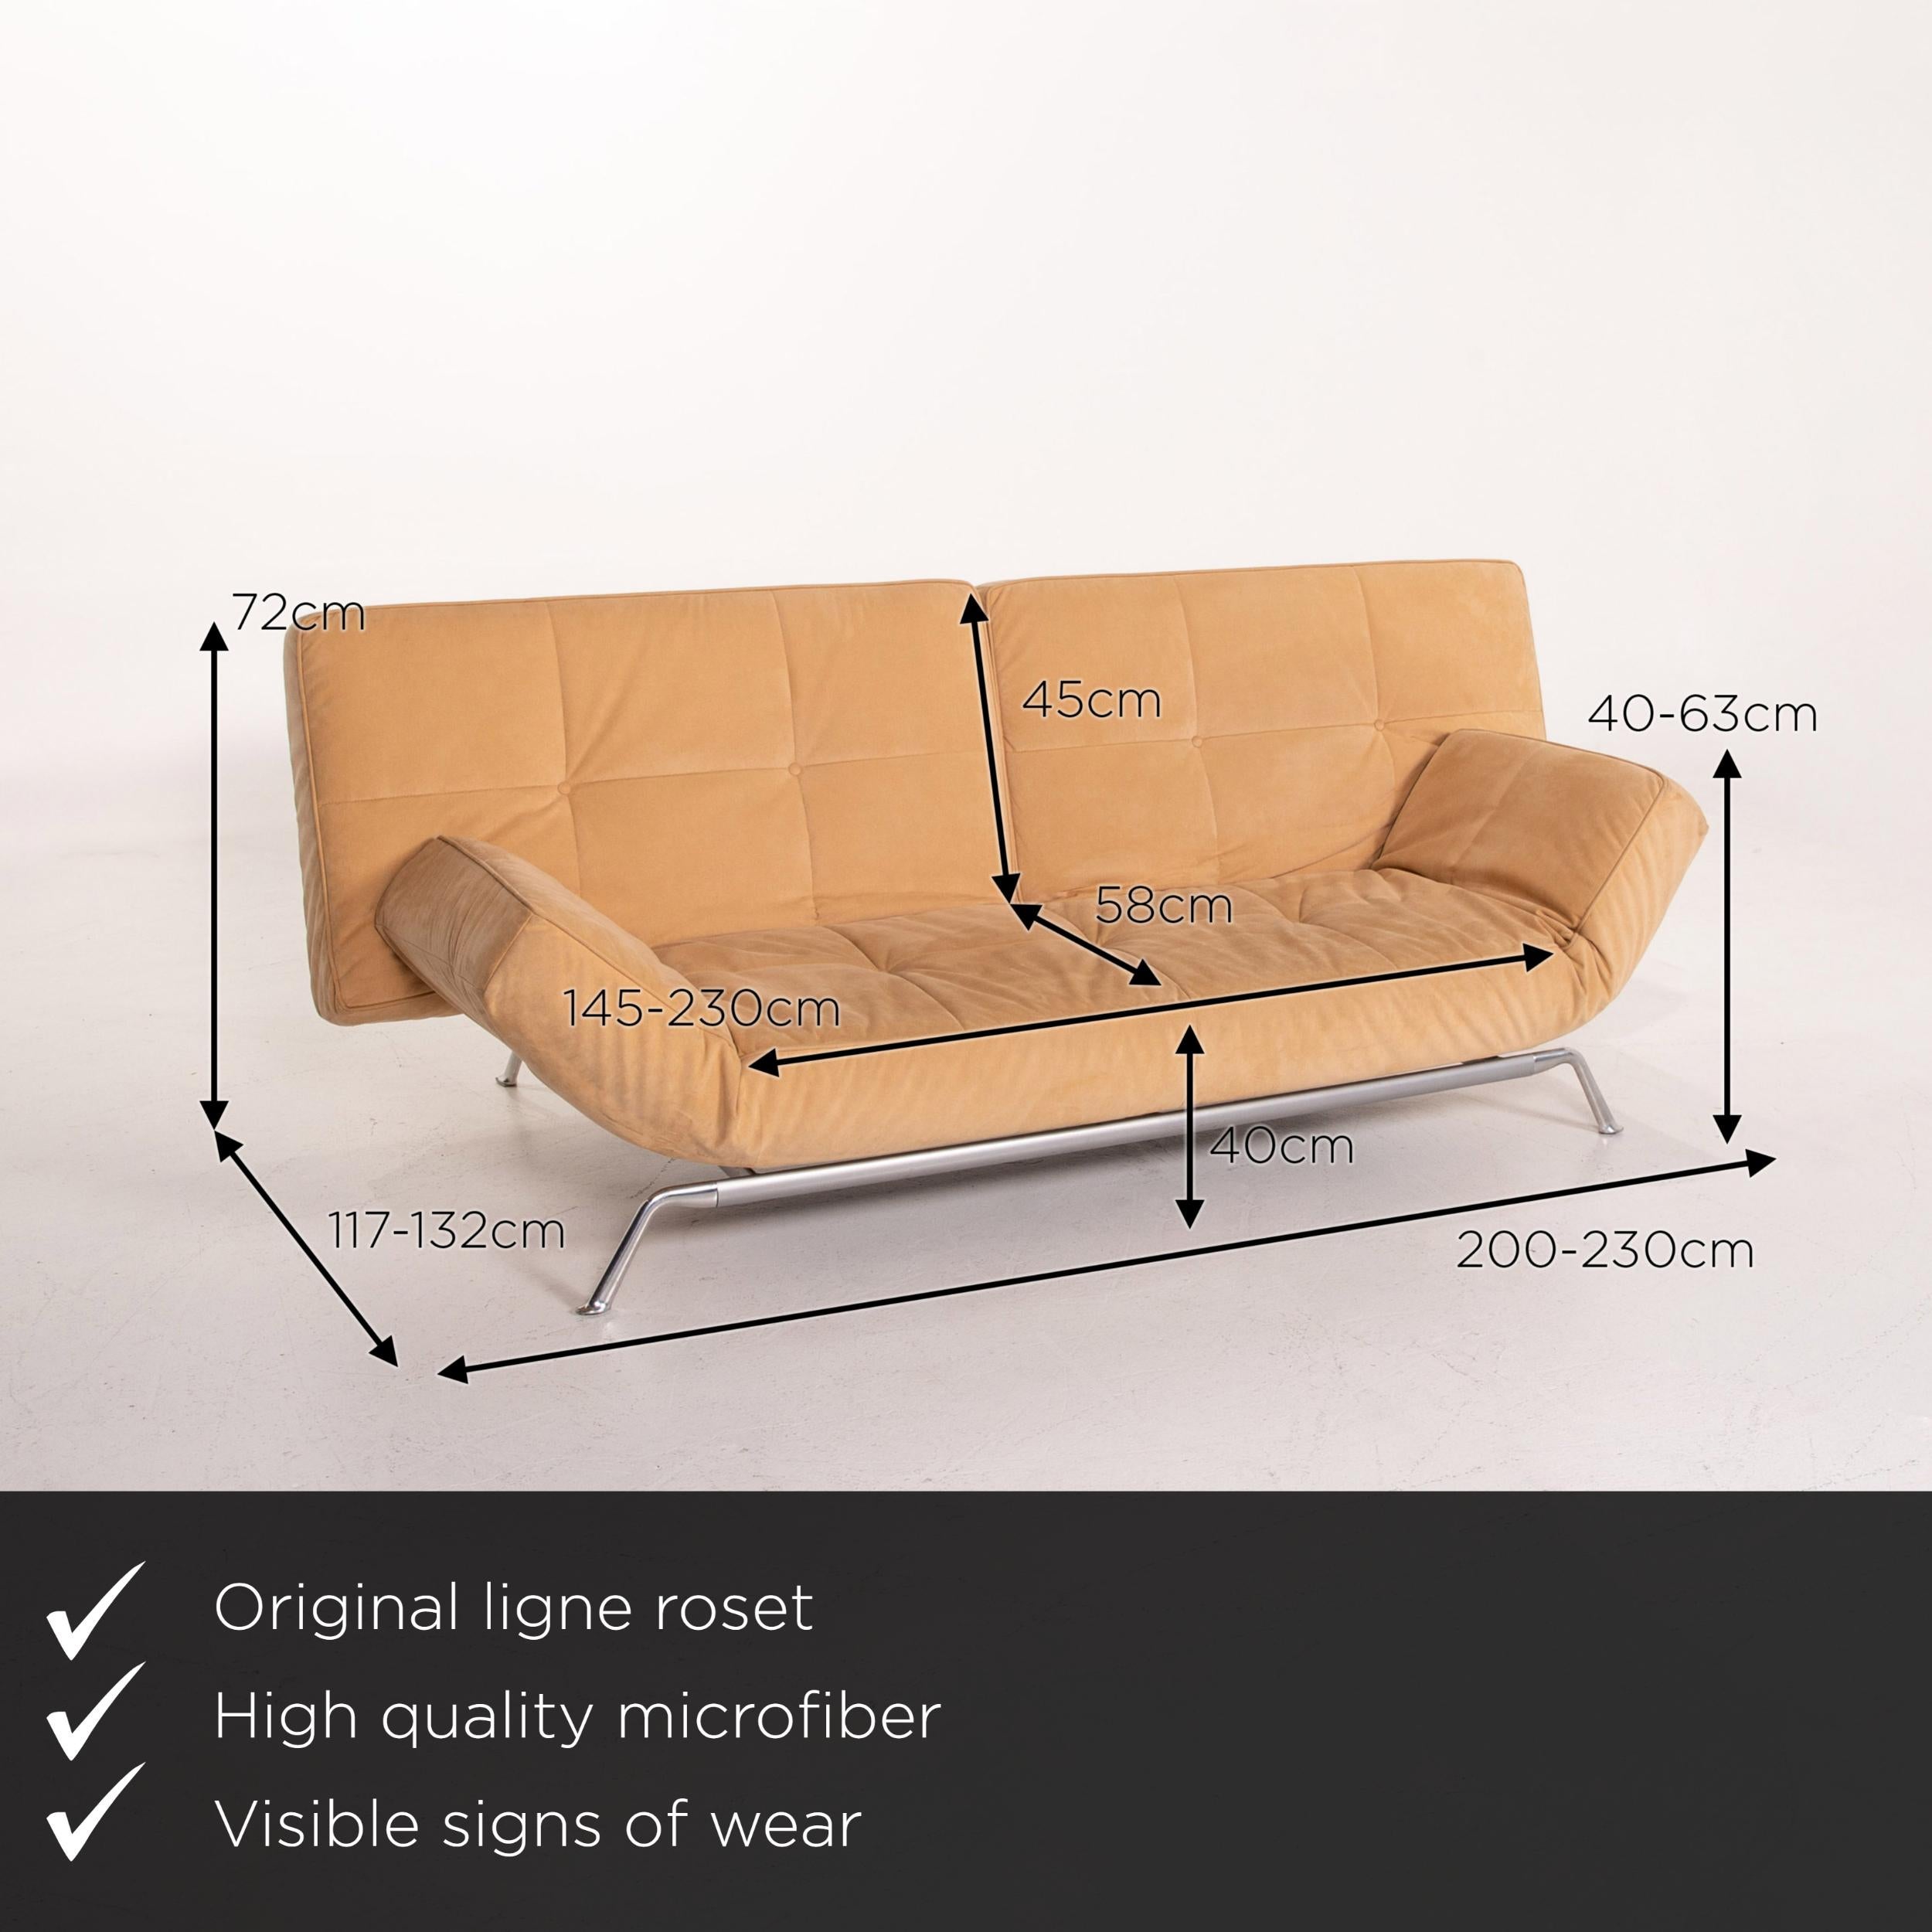 We present to you a ligne roset Smala microfiber fabric sofa bed beige three-seat sofa sleep.


 Product measurements in centimeters:
 

Depth 117
Width 200
Height 72
Seat height 40
Rest height 63
Seat depth 58
Seat width 145
Back